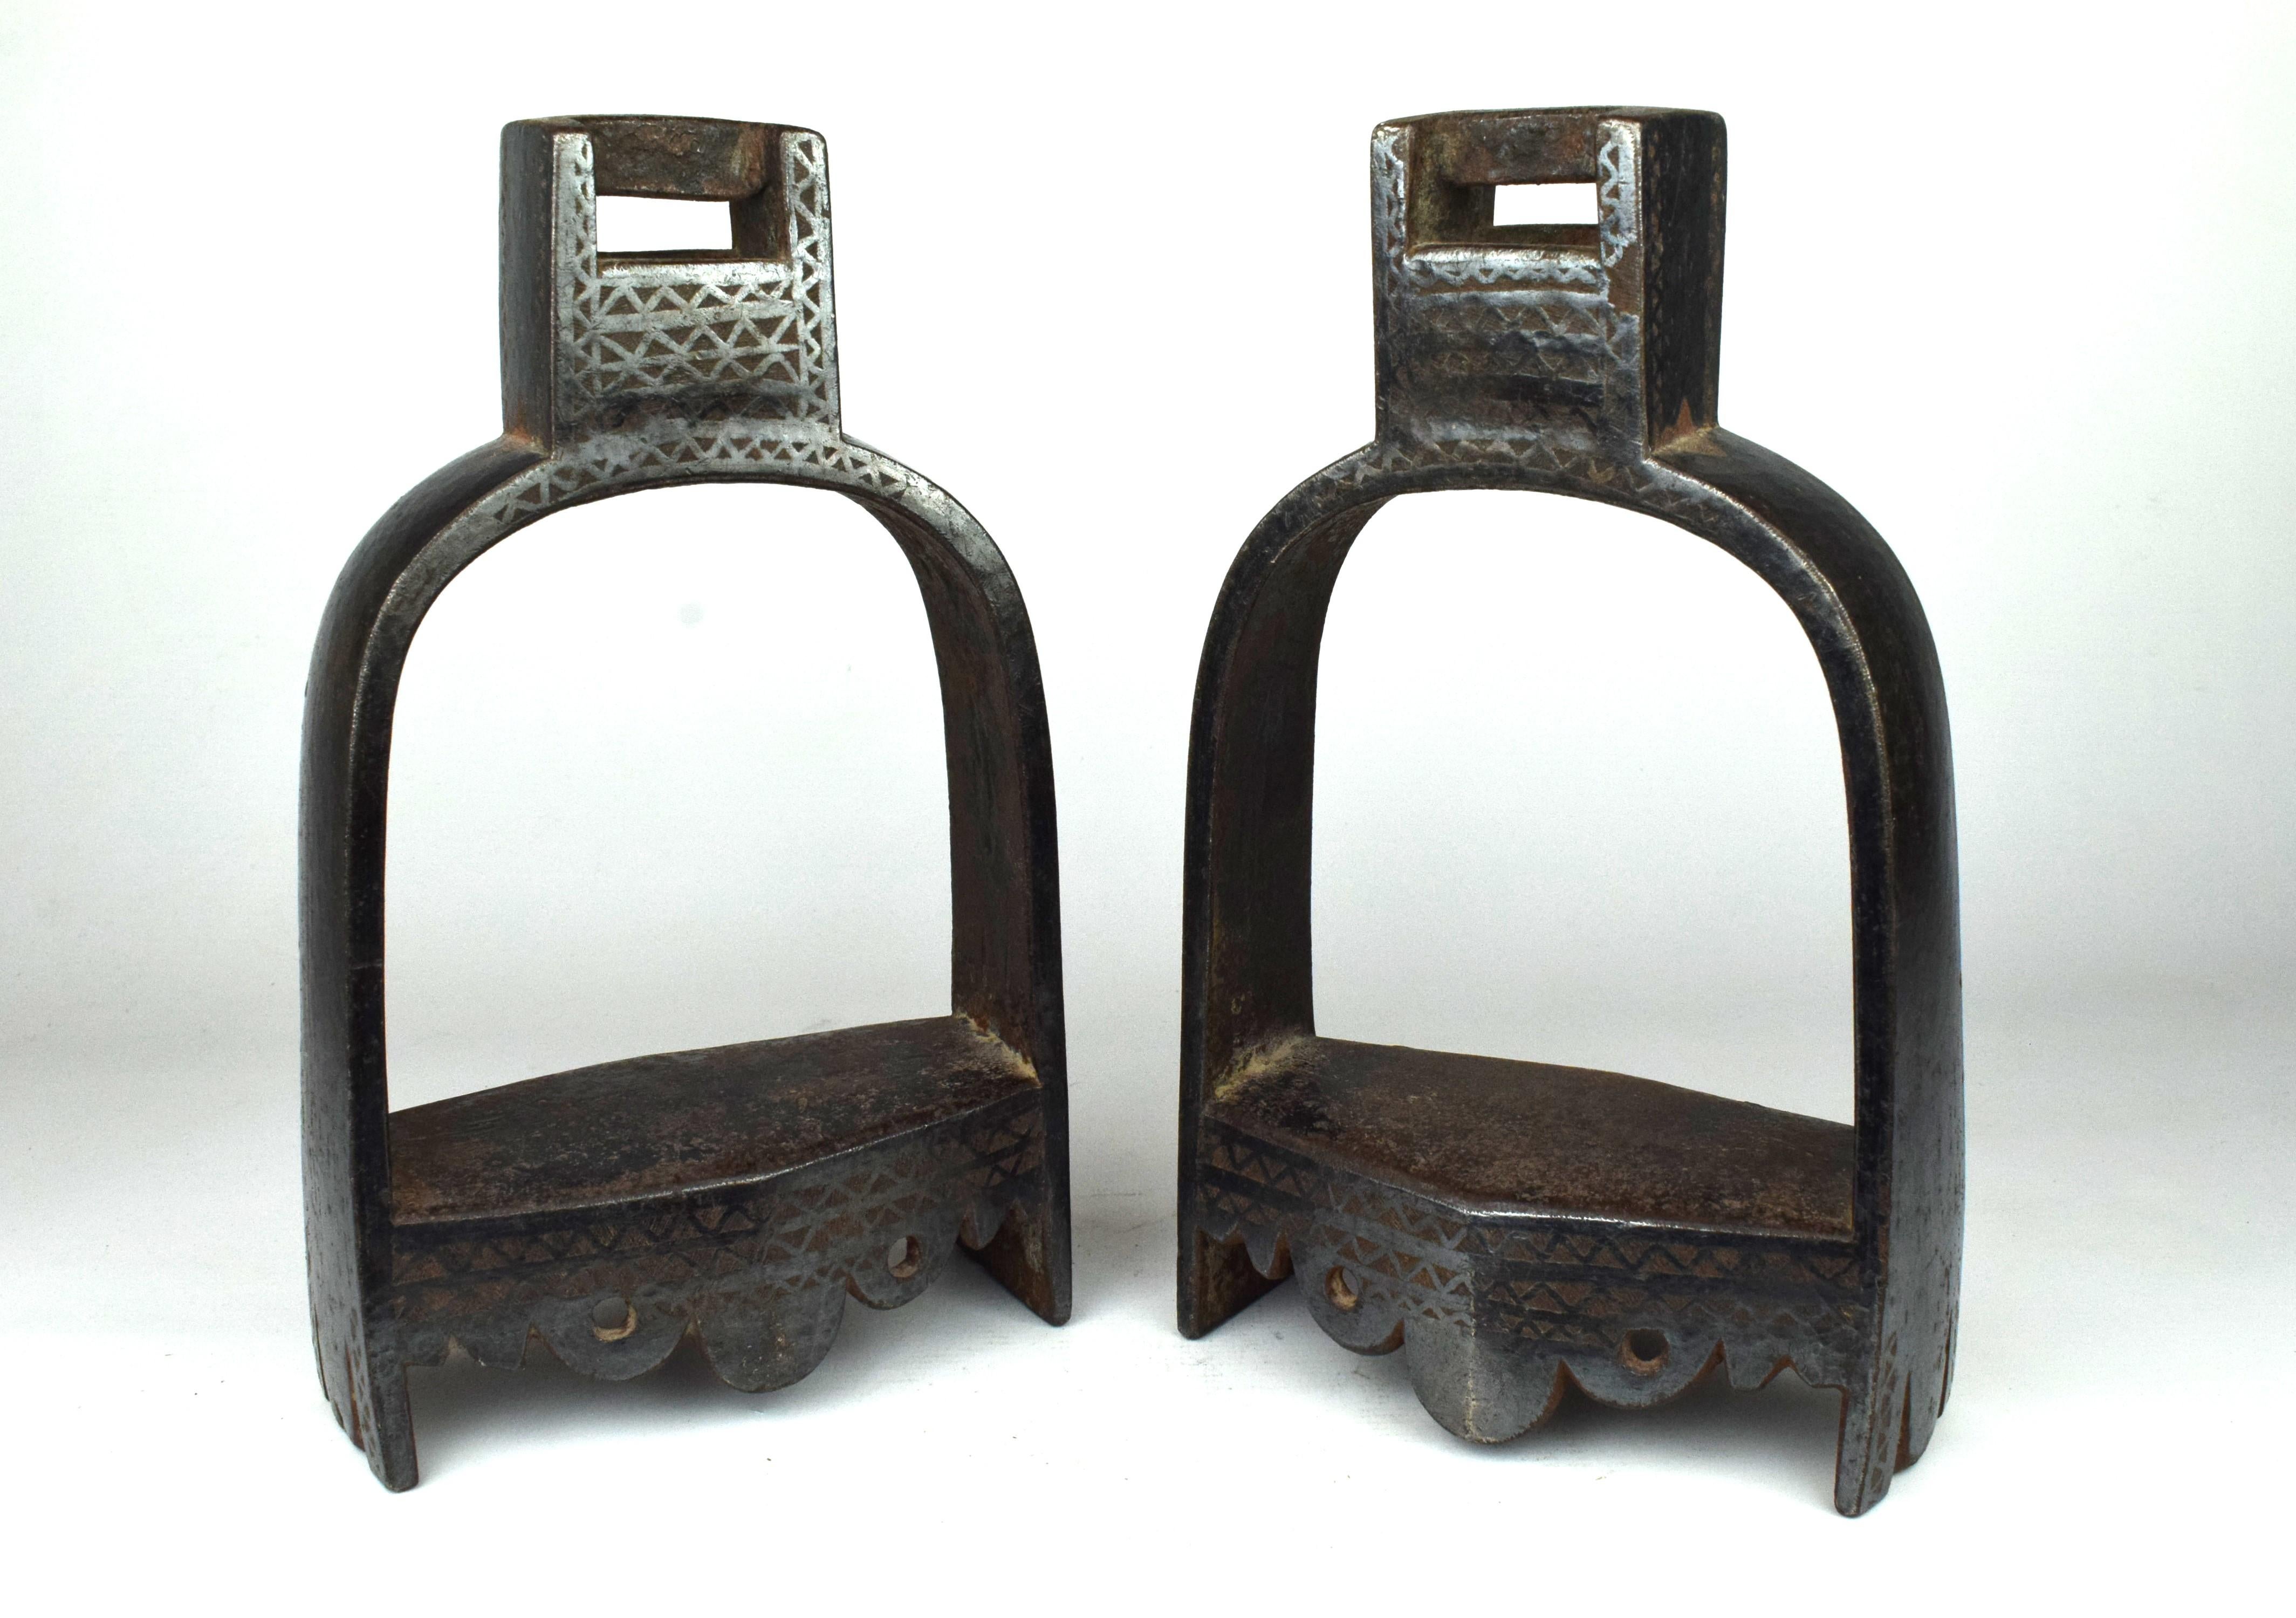 Thepair of metal Mughal horse stirrups with silver inlay, dating back to the 19th century, are astriking example of equestrian equipment reflecting the artistry and craftsmanship of the Mughal period.

The stirrups are made of a durable metal, 